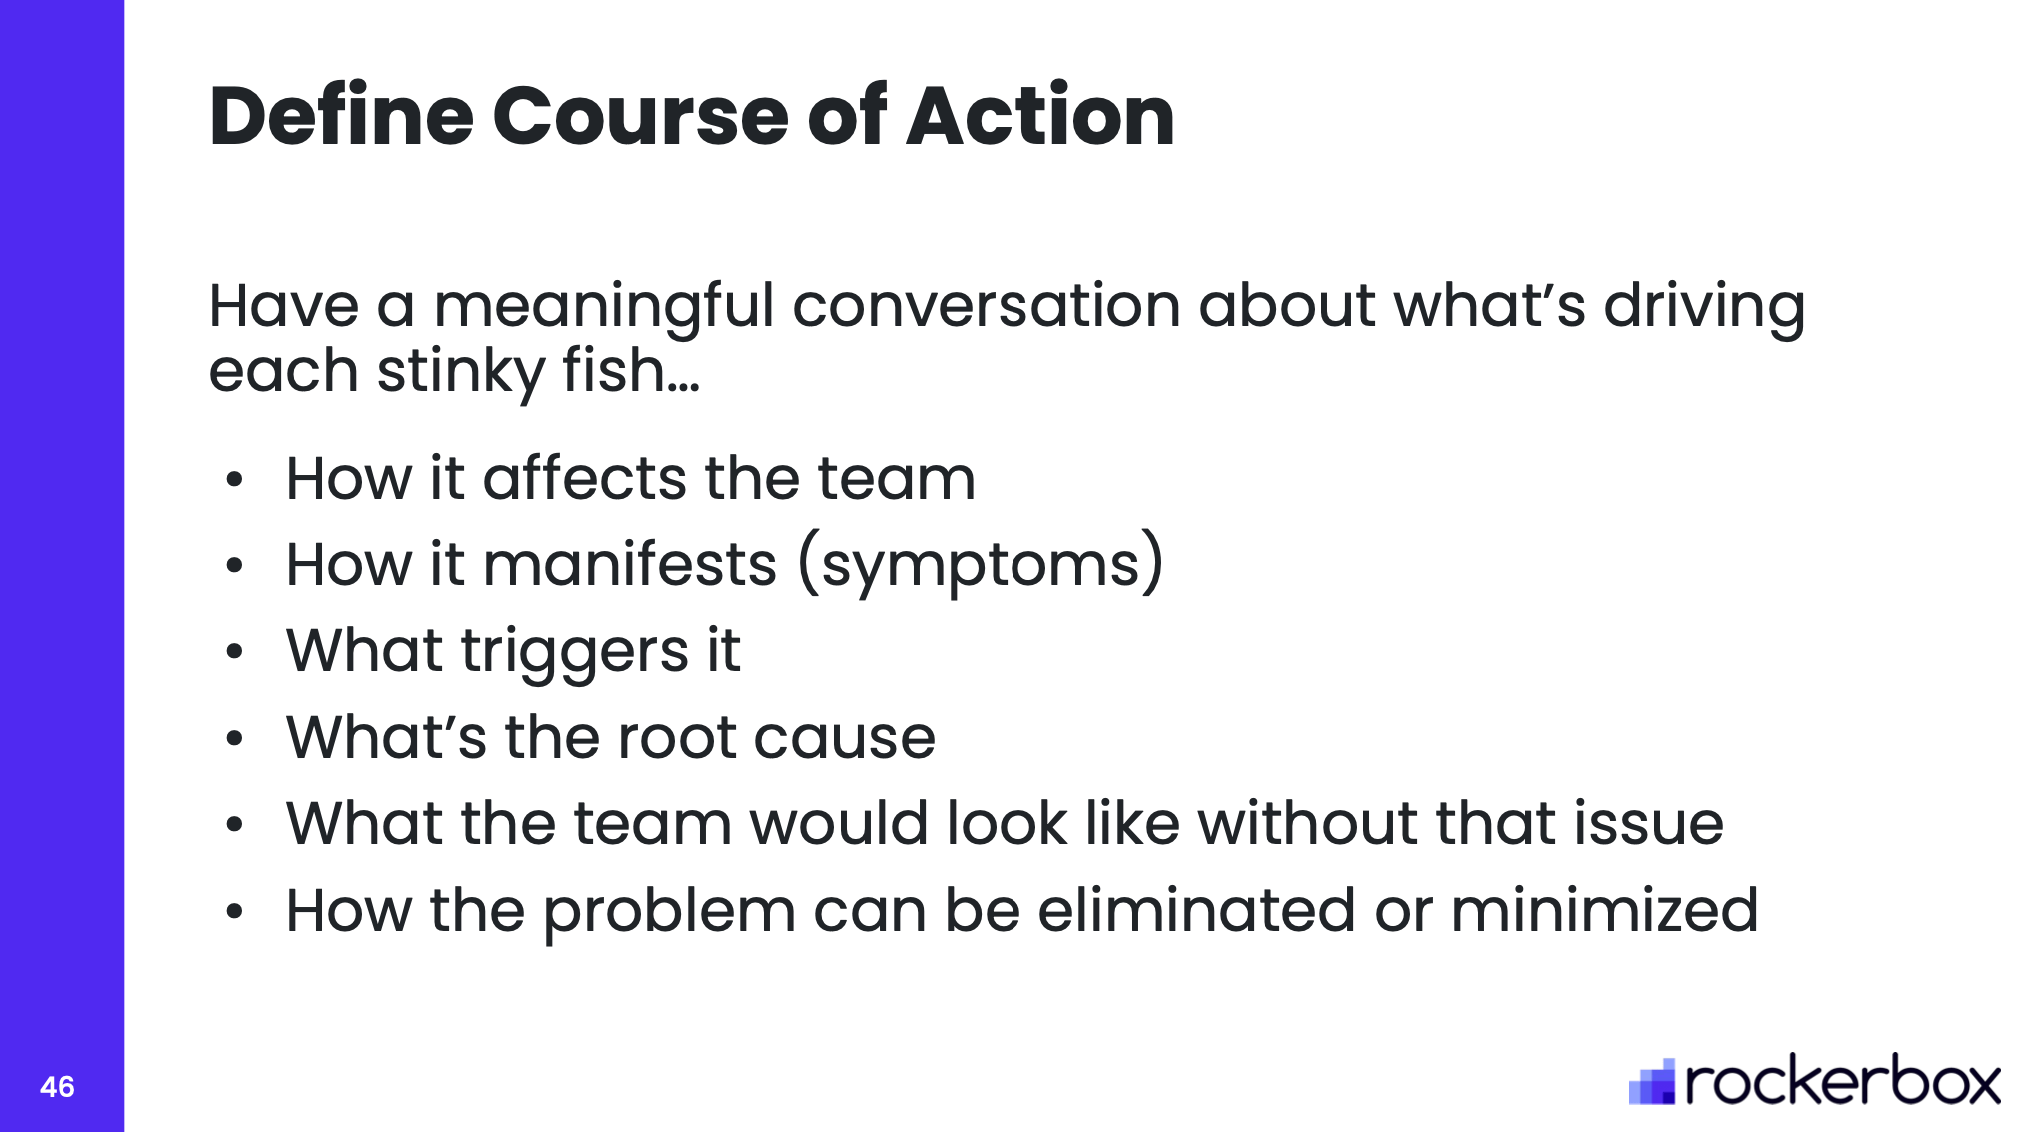 Define Course of Action: Have a Meaningful Conversation